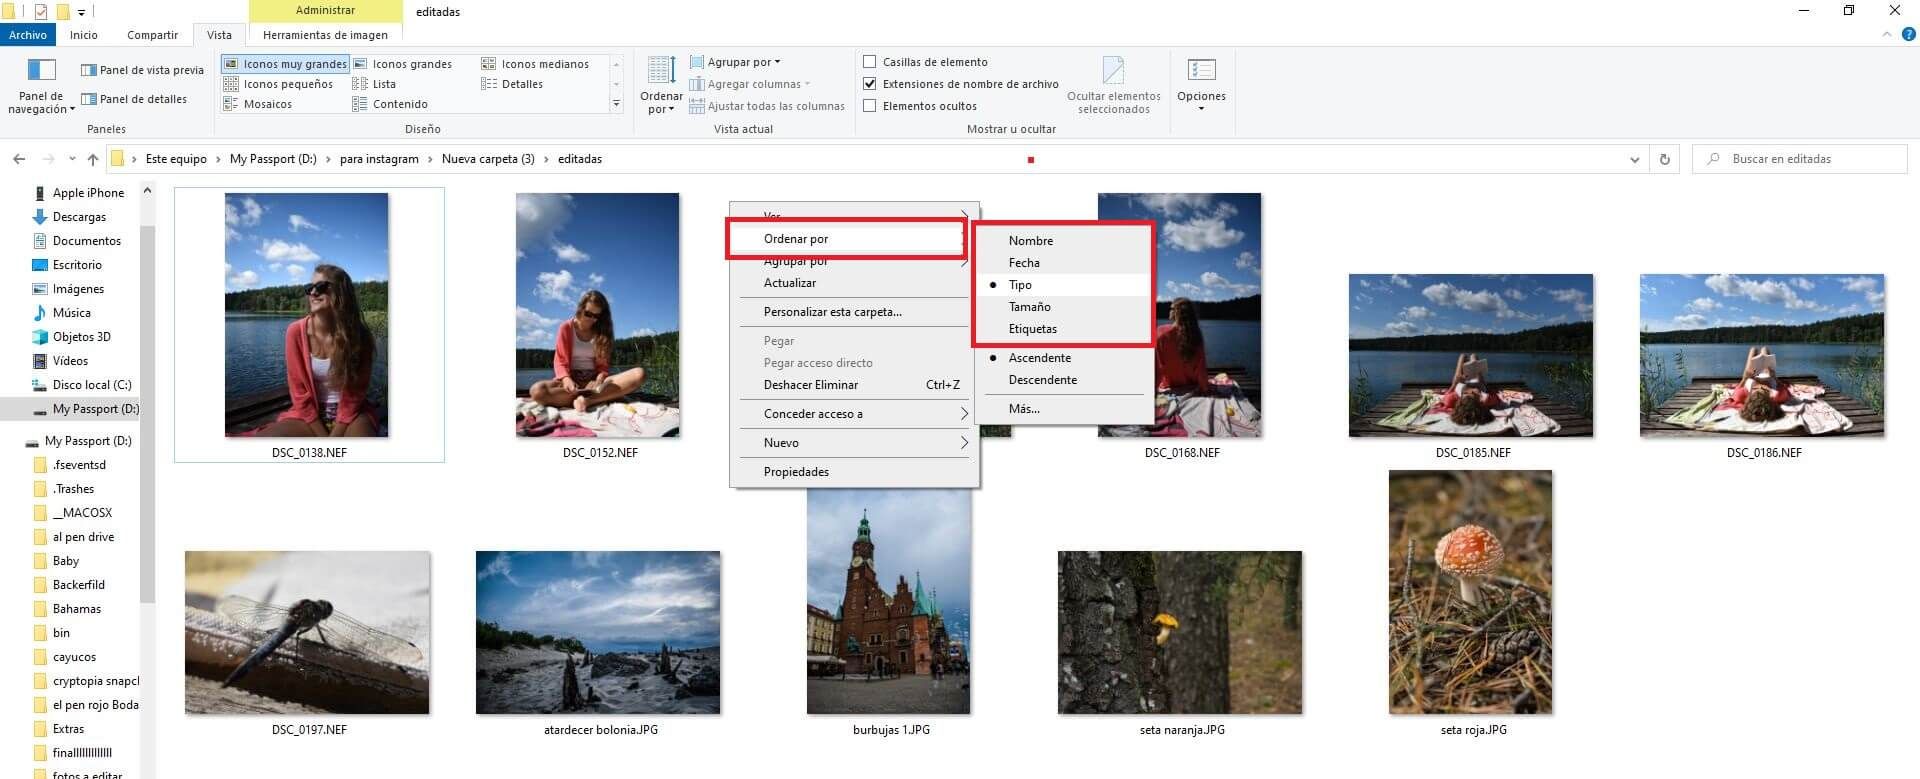 Irfanview and configure the navigation order between images